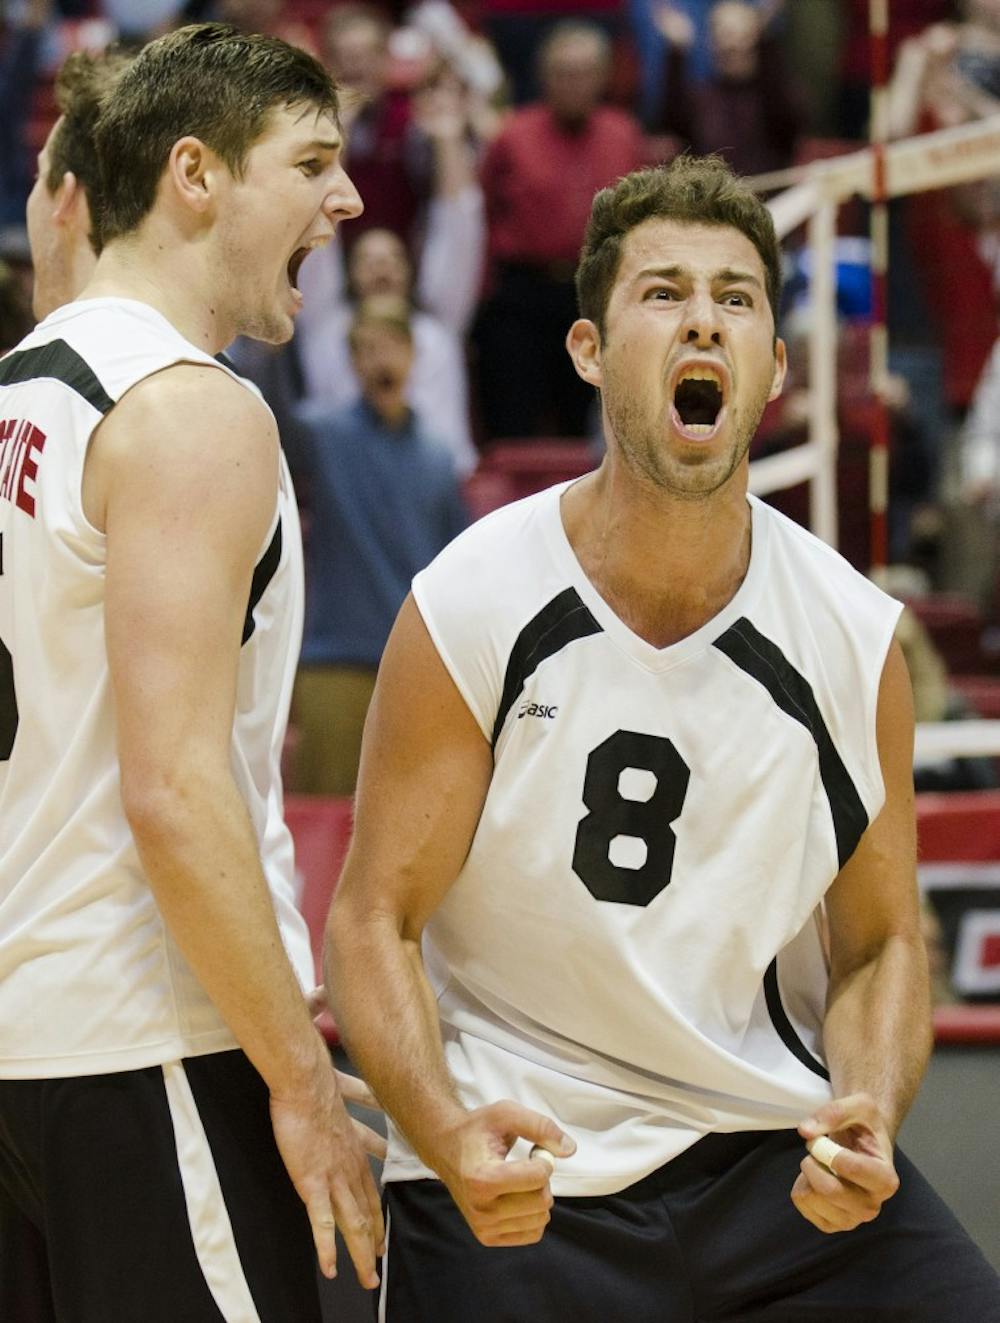 Hiago Garchet reacts after winning the match against Harvard on Jan. 15 at Worthen Arena. DN PHOTO EMMA ROGERS